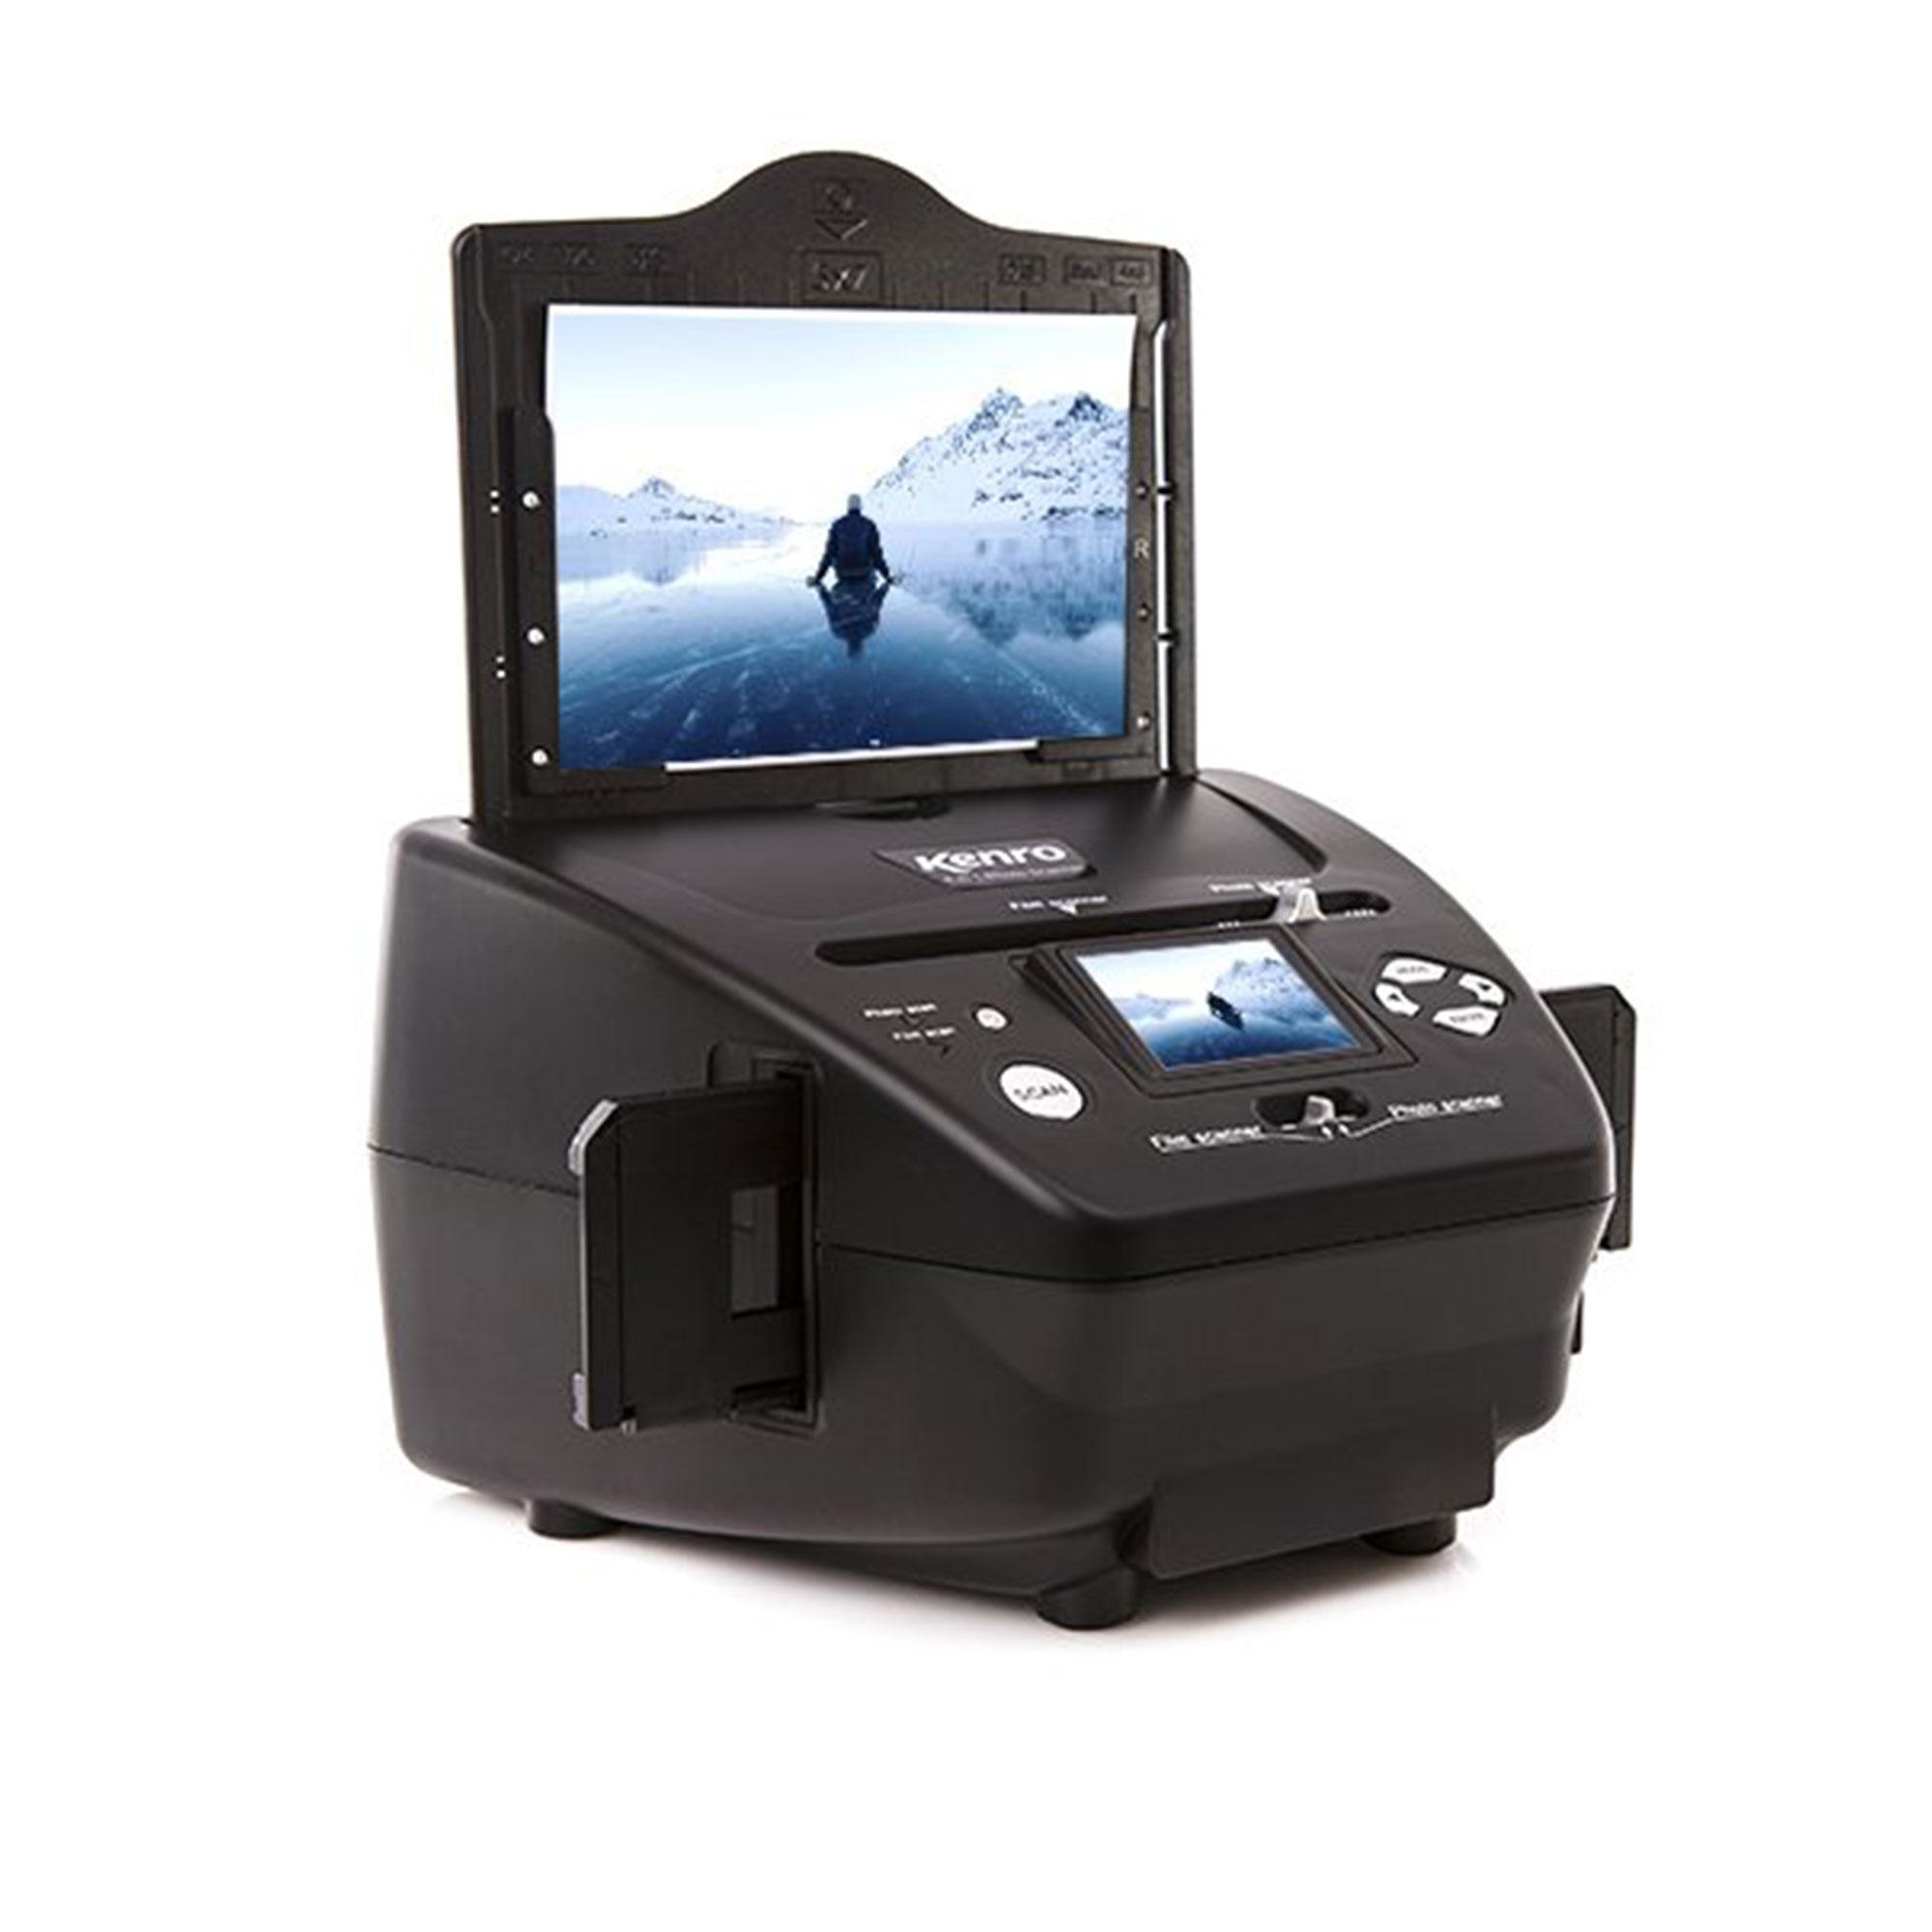 4-in-1 Photo & Film Scanner -New improved 8MP resolution